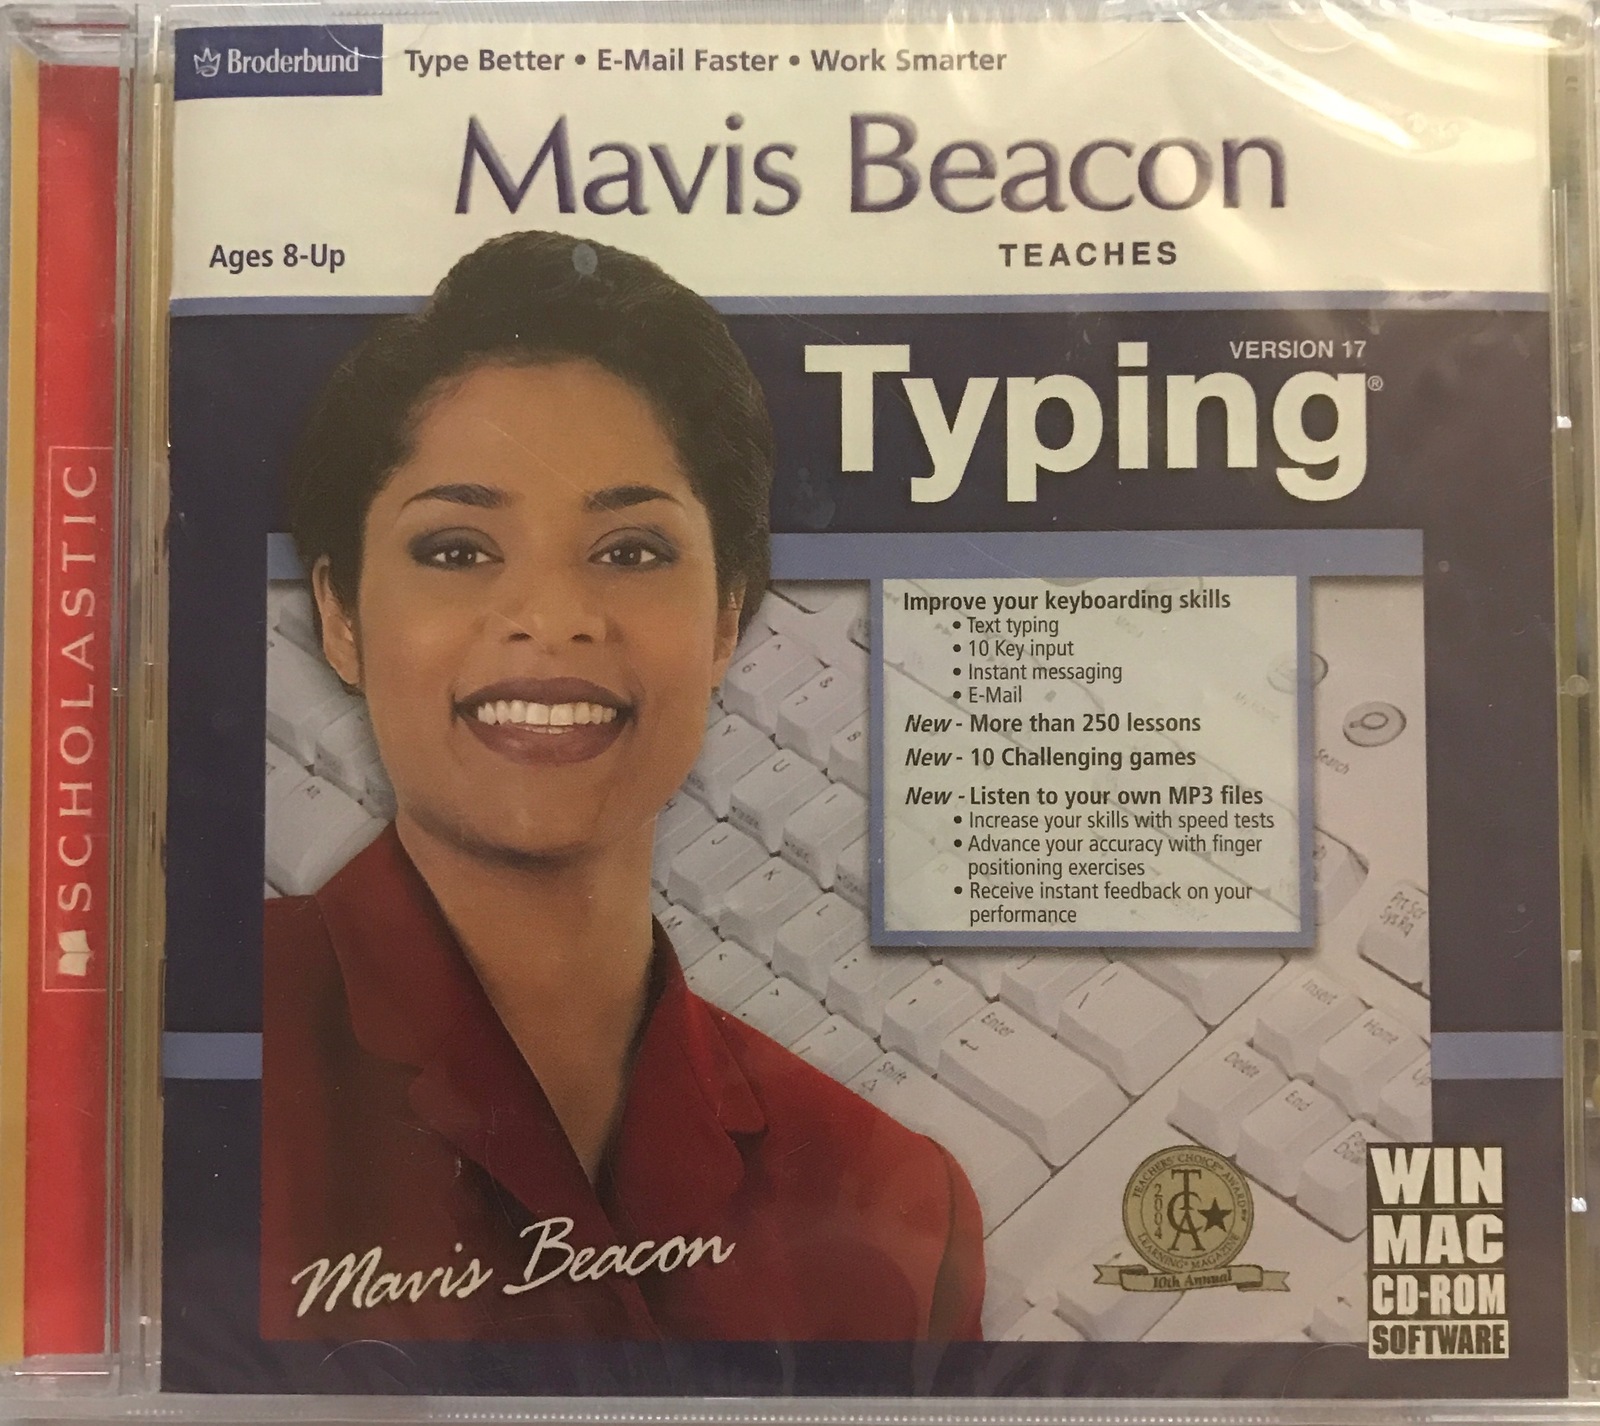 Mavis beacon teaches typing deluxe 17 free download serial number